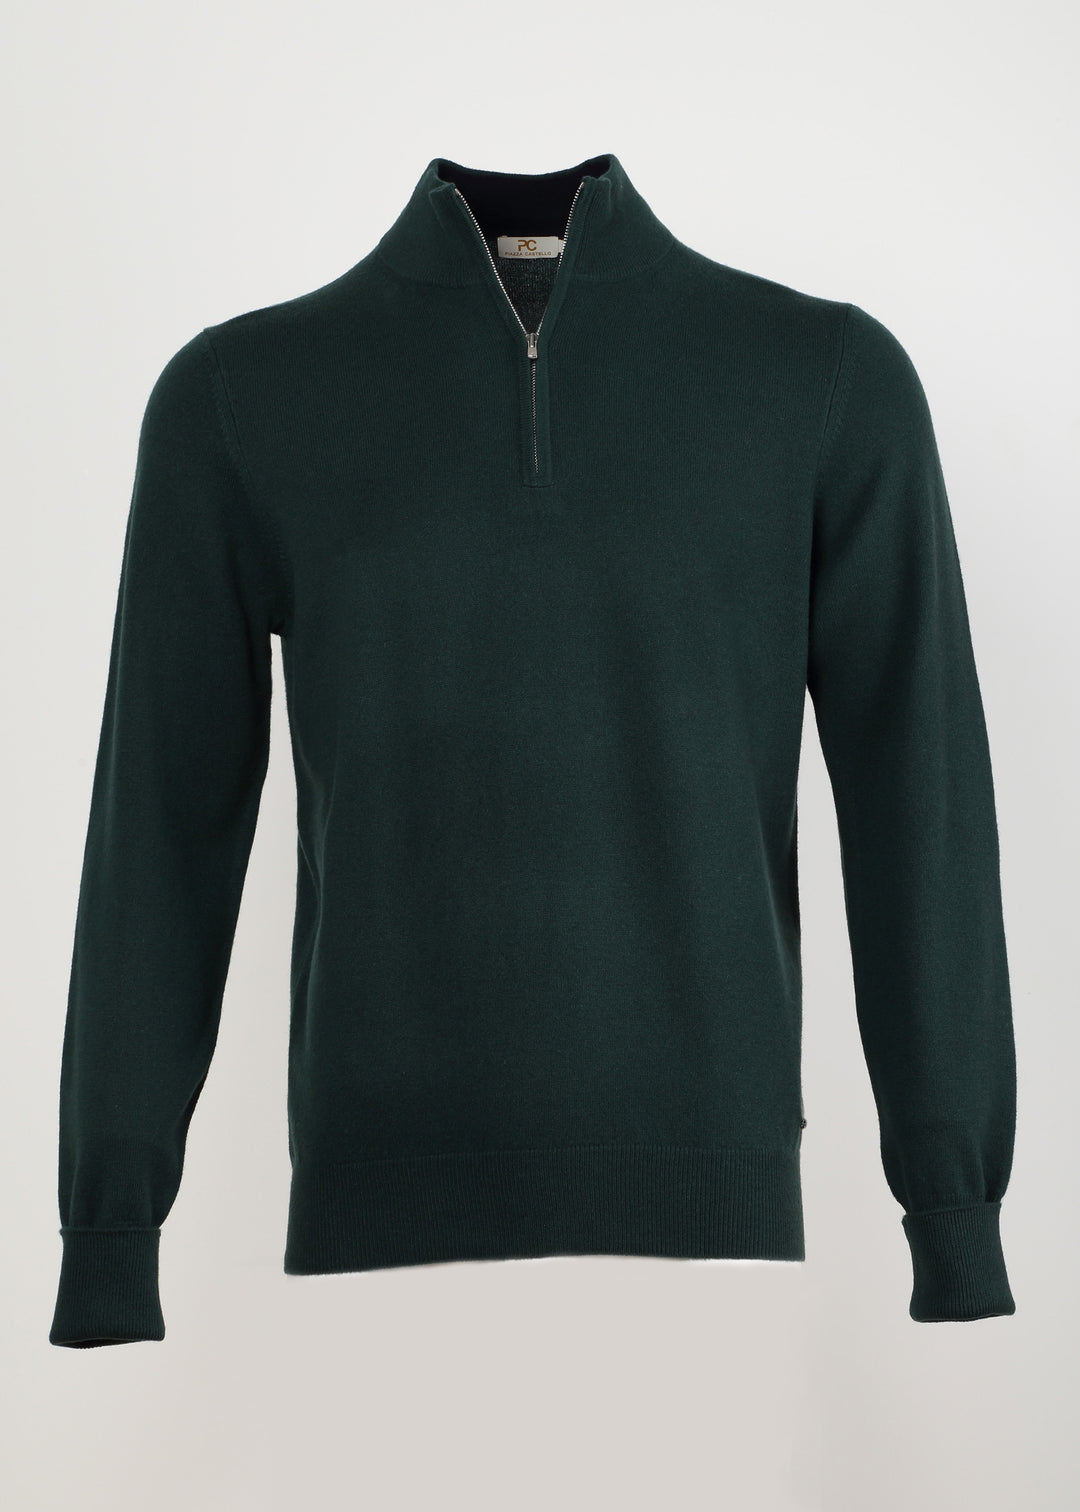 Half Neck Cashmere Pullover with Zip